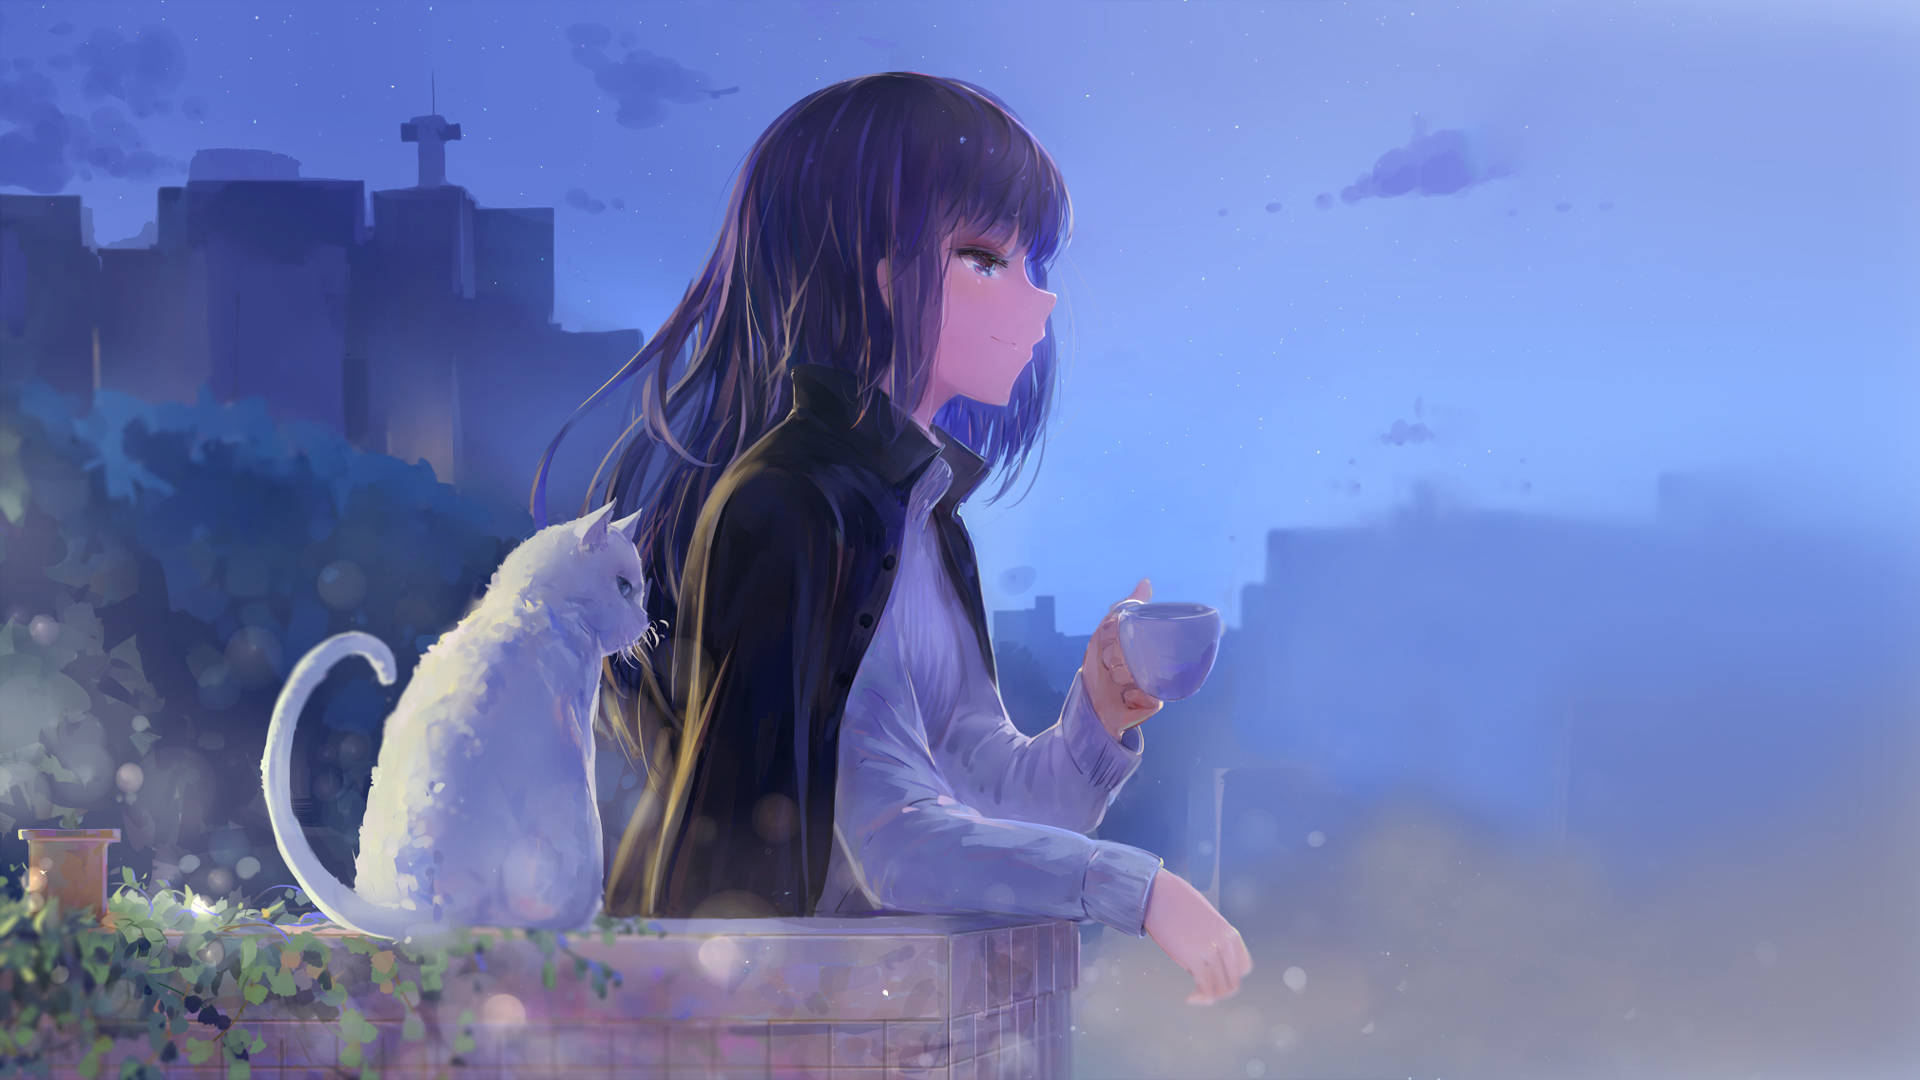 Anime Art Girl With Cat Background